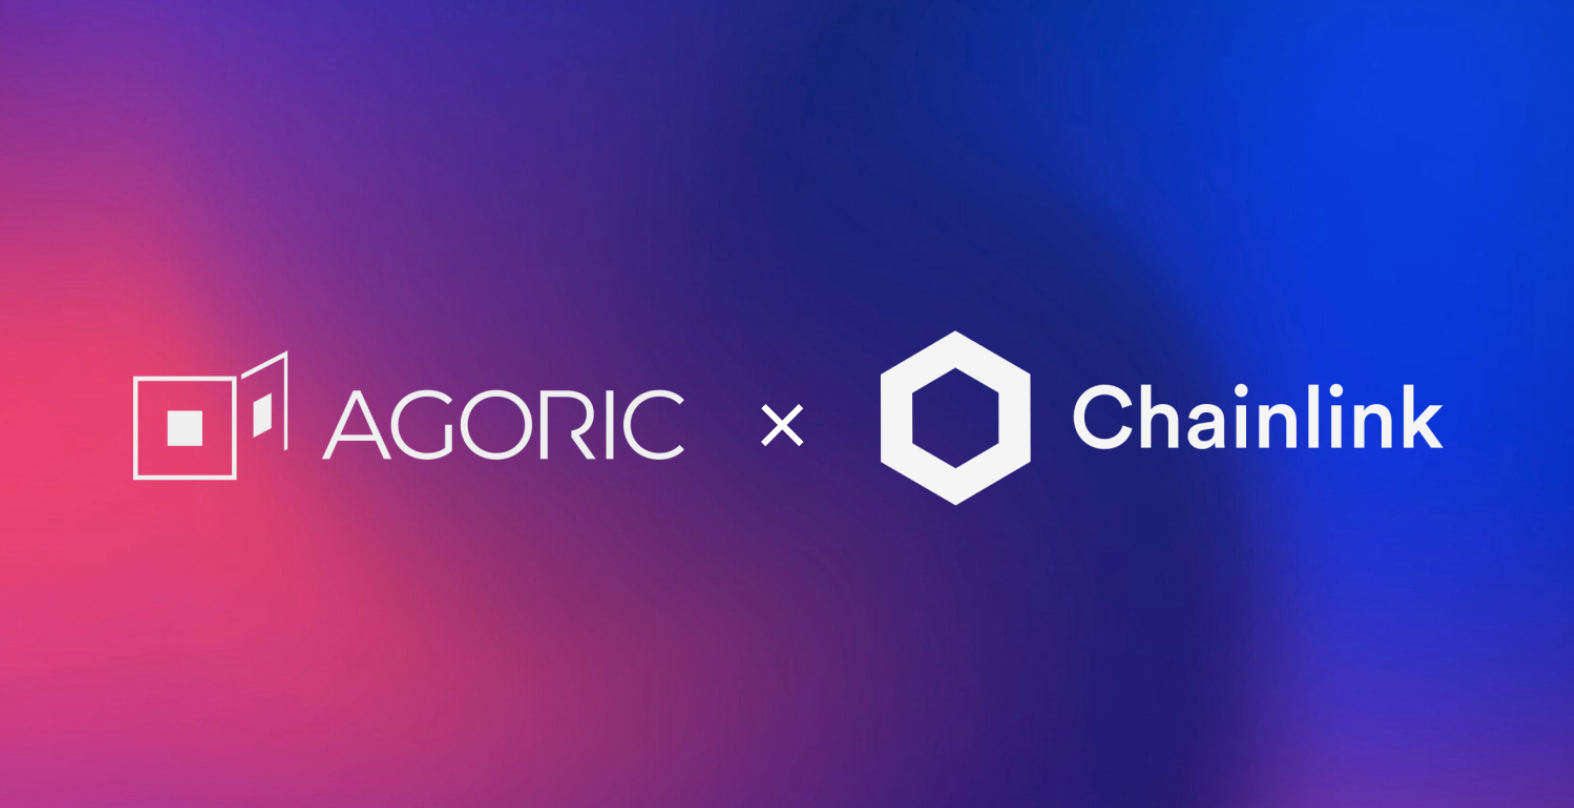 Agoric and Chainlink Integration Brings Plug’n’Play Oracles to JavaScript Smart Contracts